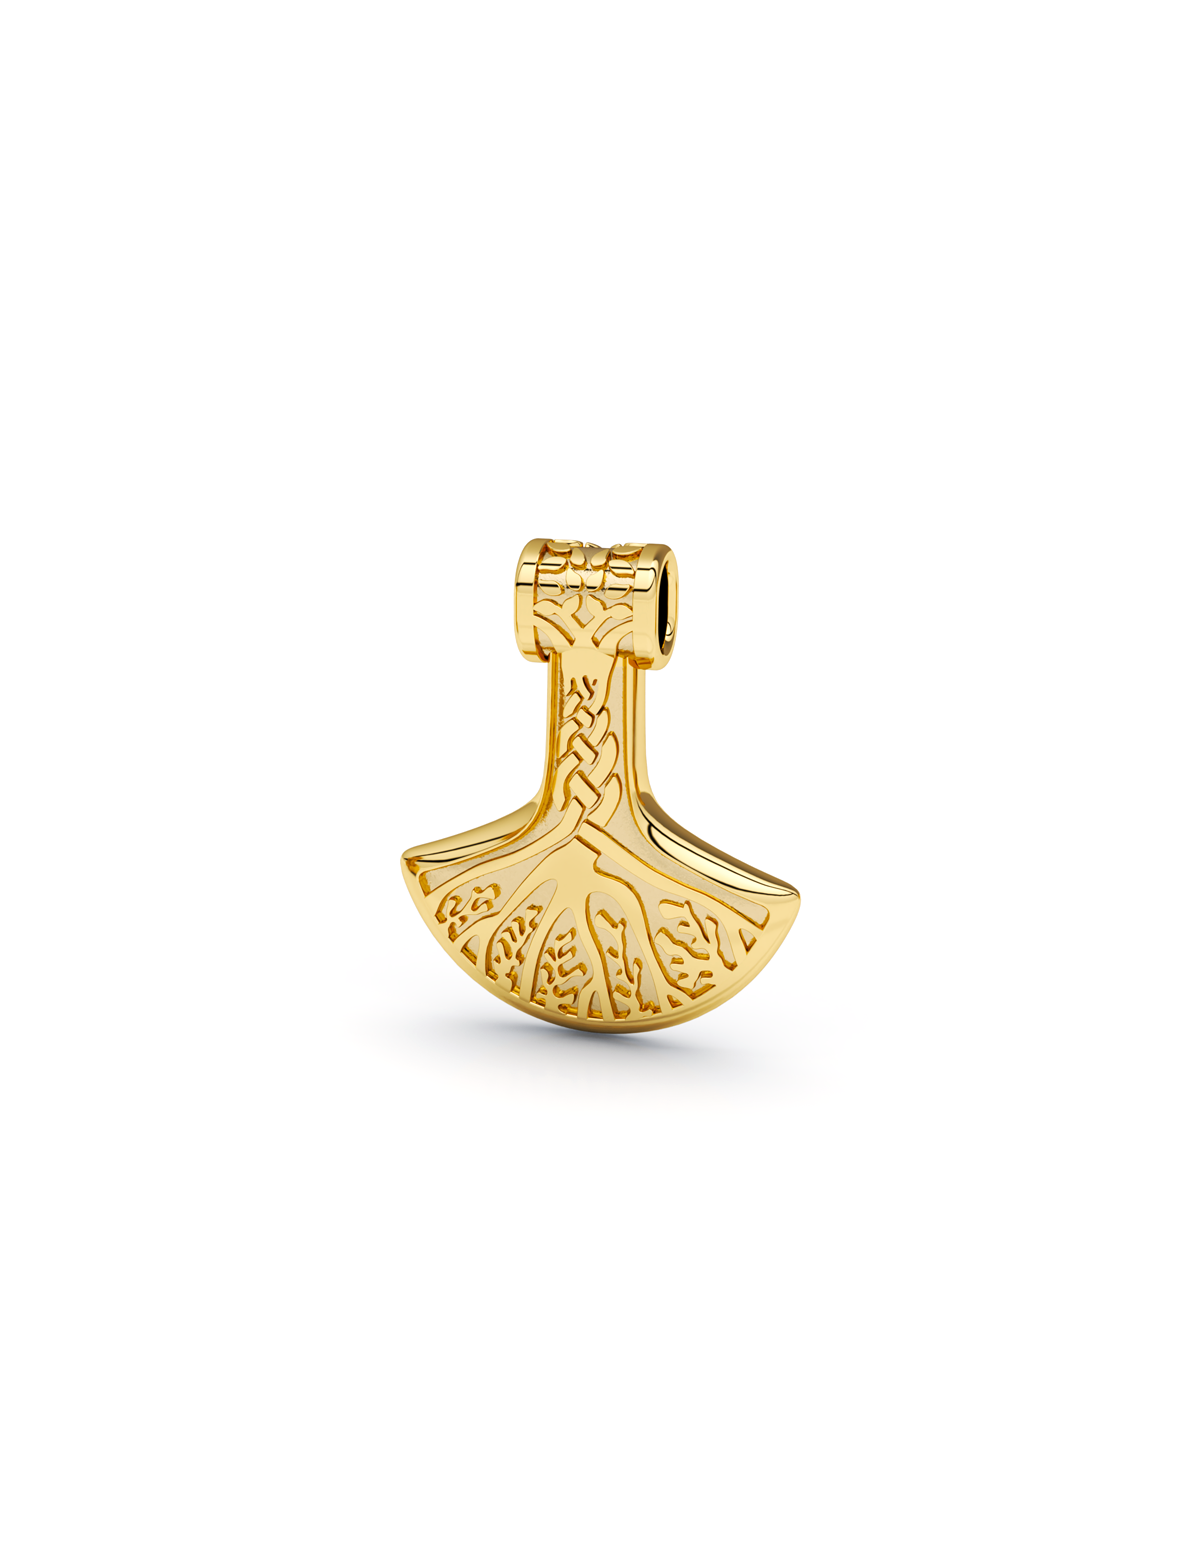 Roots Hammer Pendant 14k Gold - Small